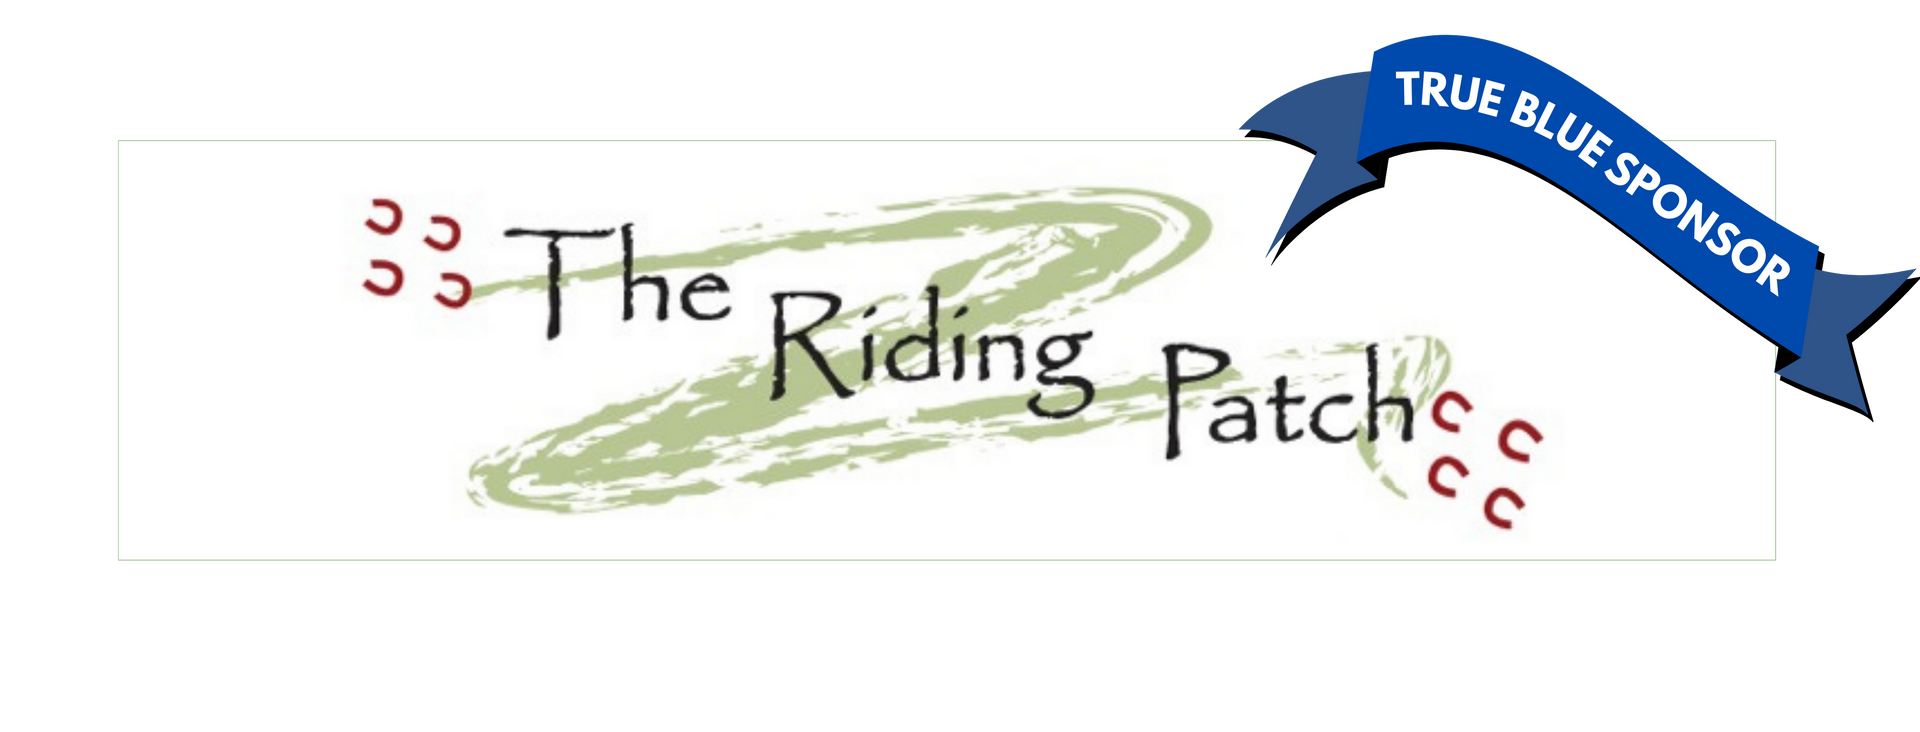 The Riding Patch